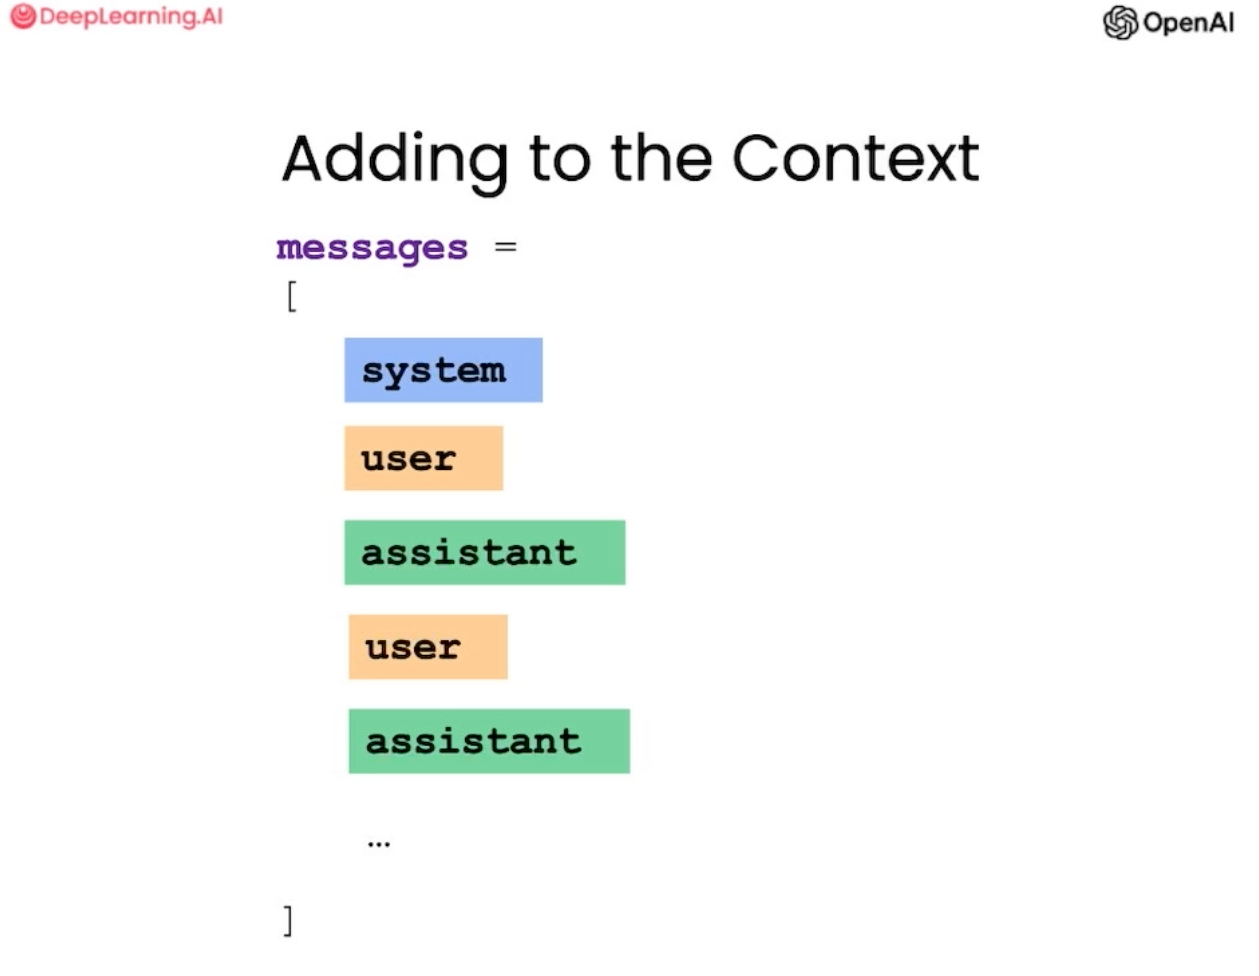 Screenshot of adding to the Context for chatbot